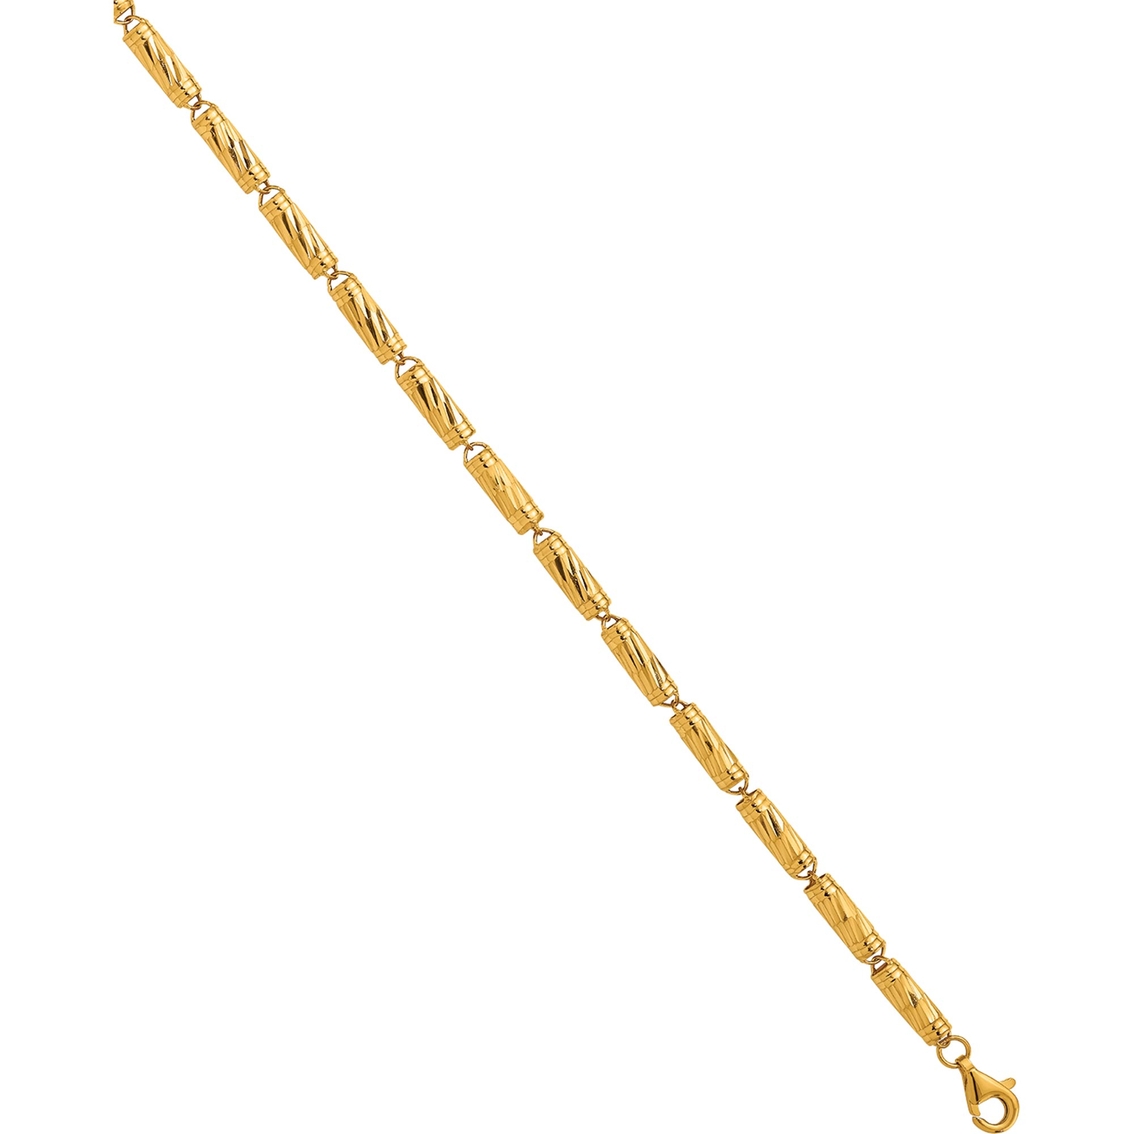 24K Pure Gold 18 in. Bamboo Link Chain Necklace - Image 3 of 6